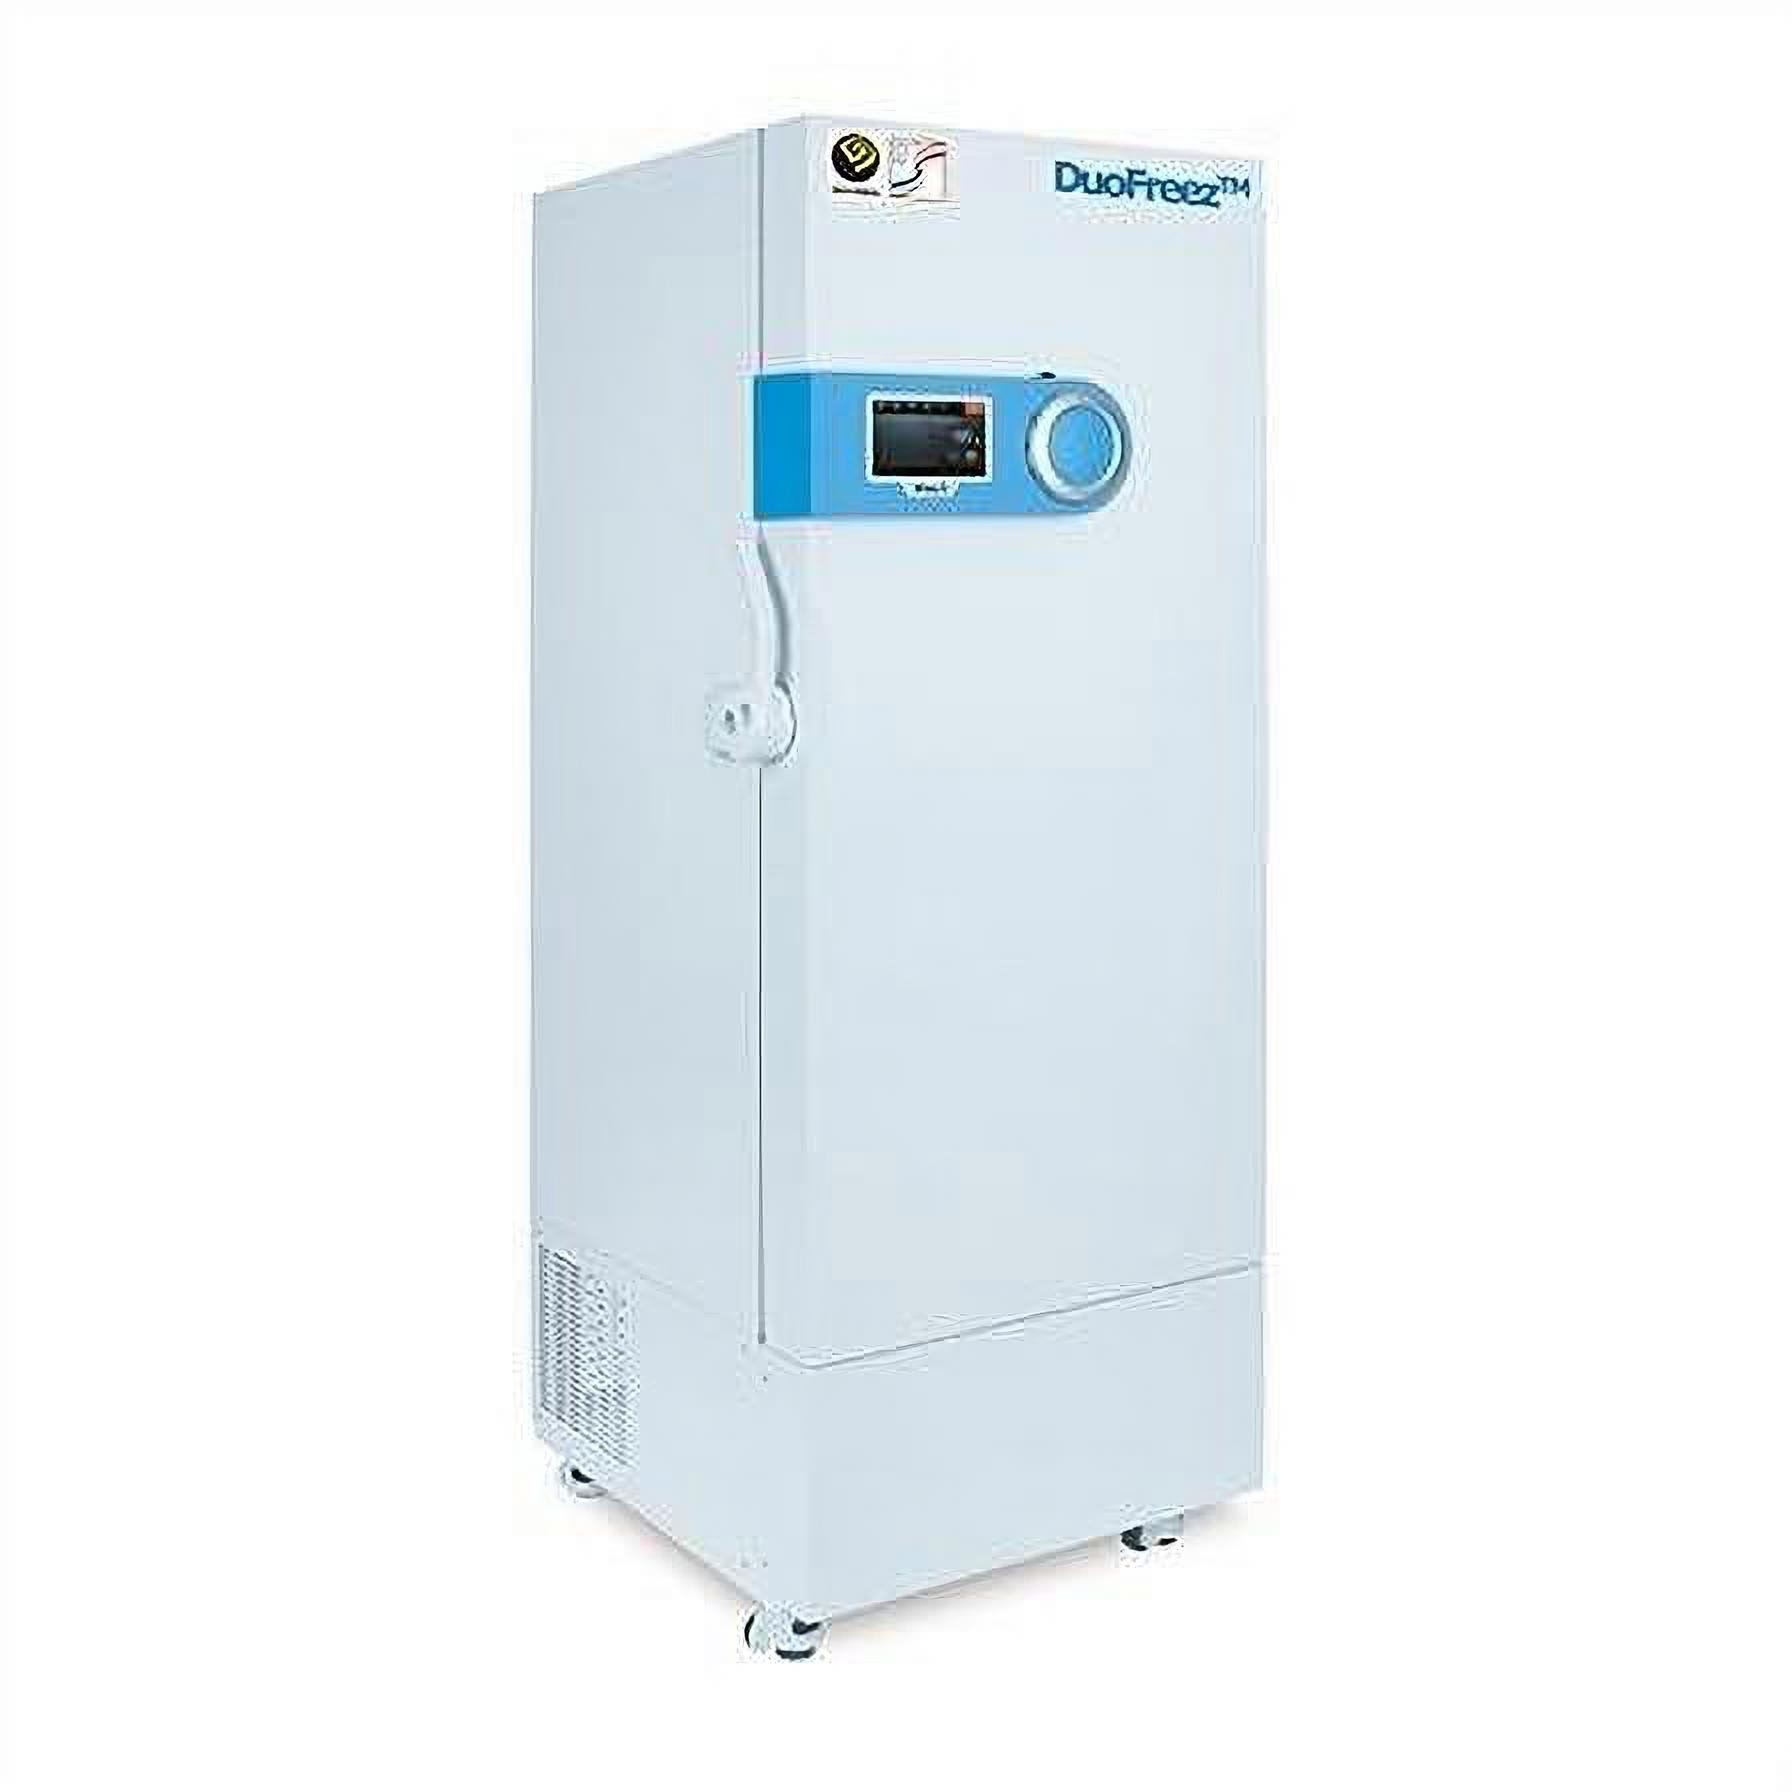 daihan-smart-lab-tm-ultra-low-temperature-freezer-solution-with-modern-and-updated-systems